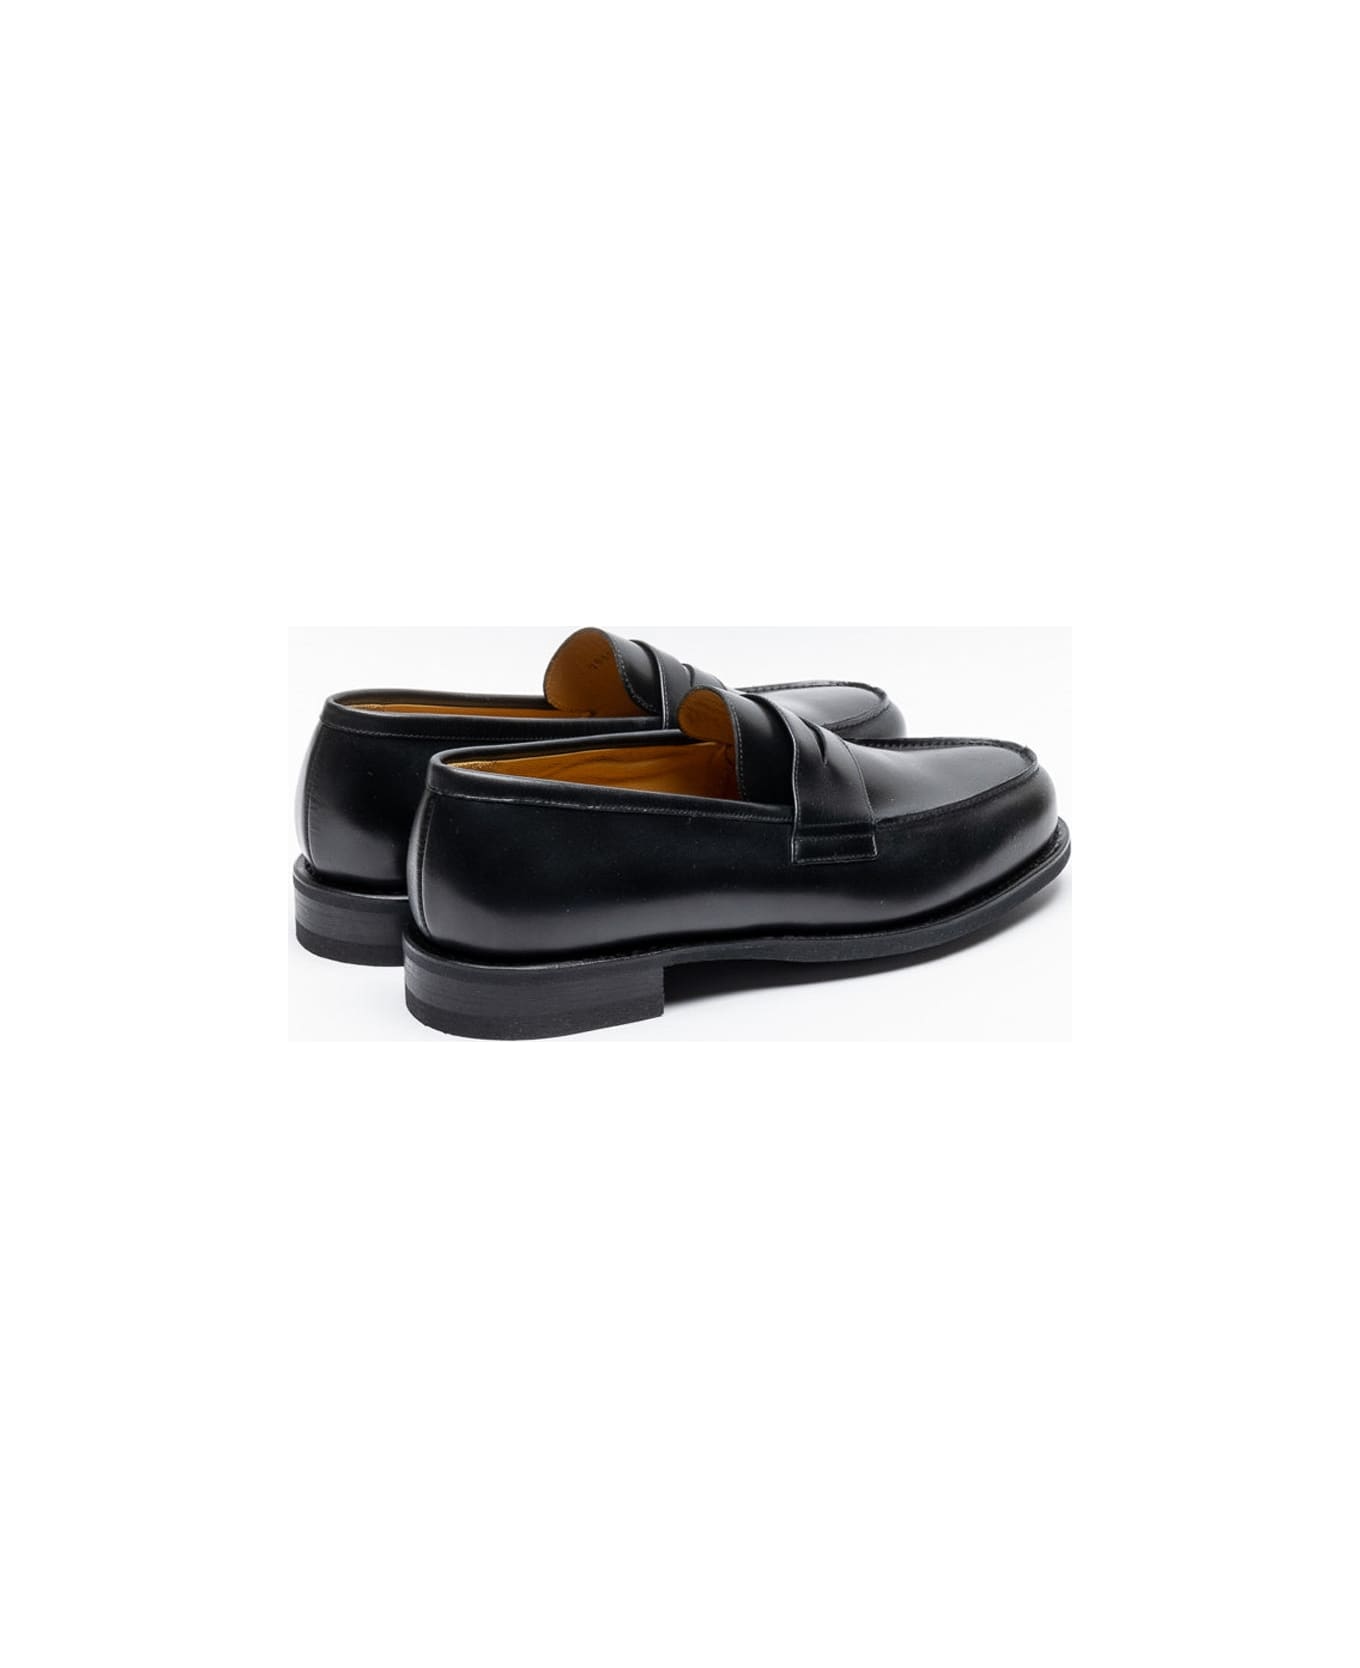 Paraboot Black Calf Penny Loafer - Nero